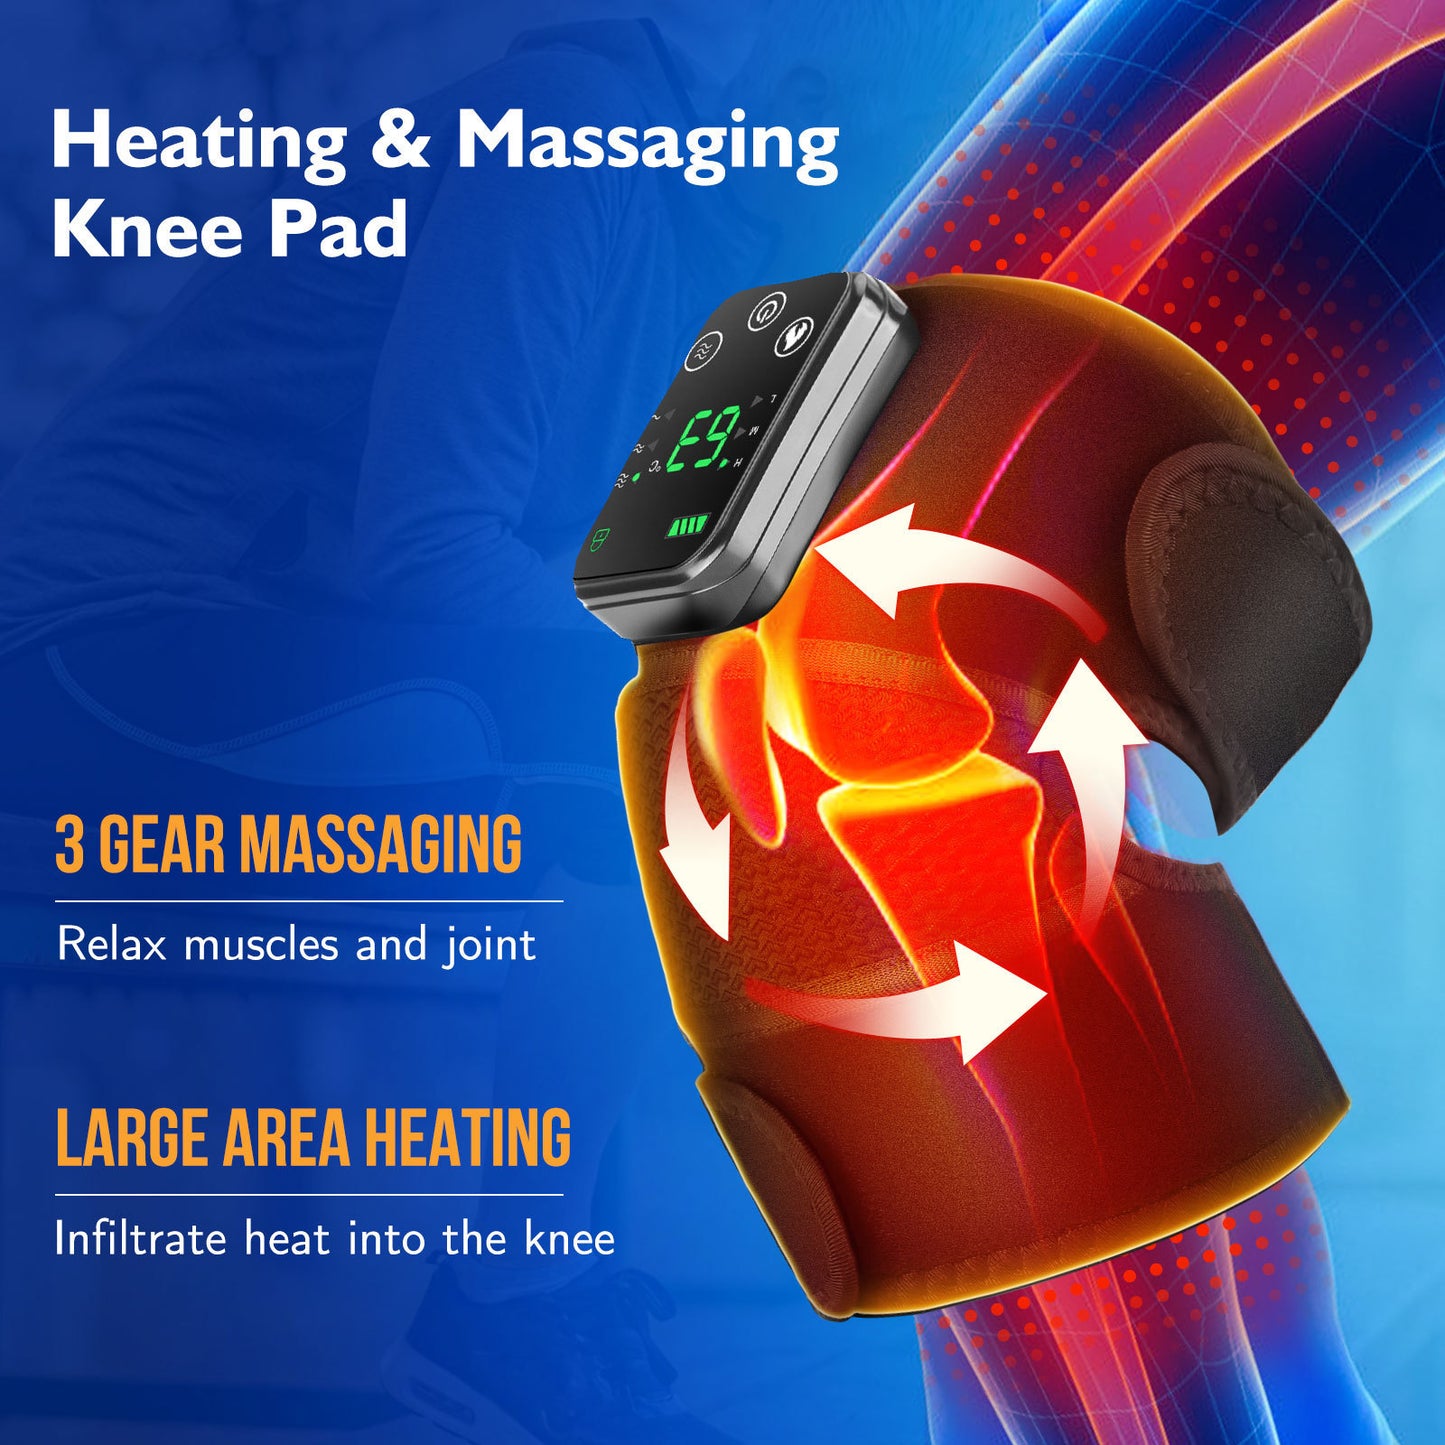 New Knee Pad Button Controlled Vibration Warmth And Hot Compress Massager